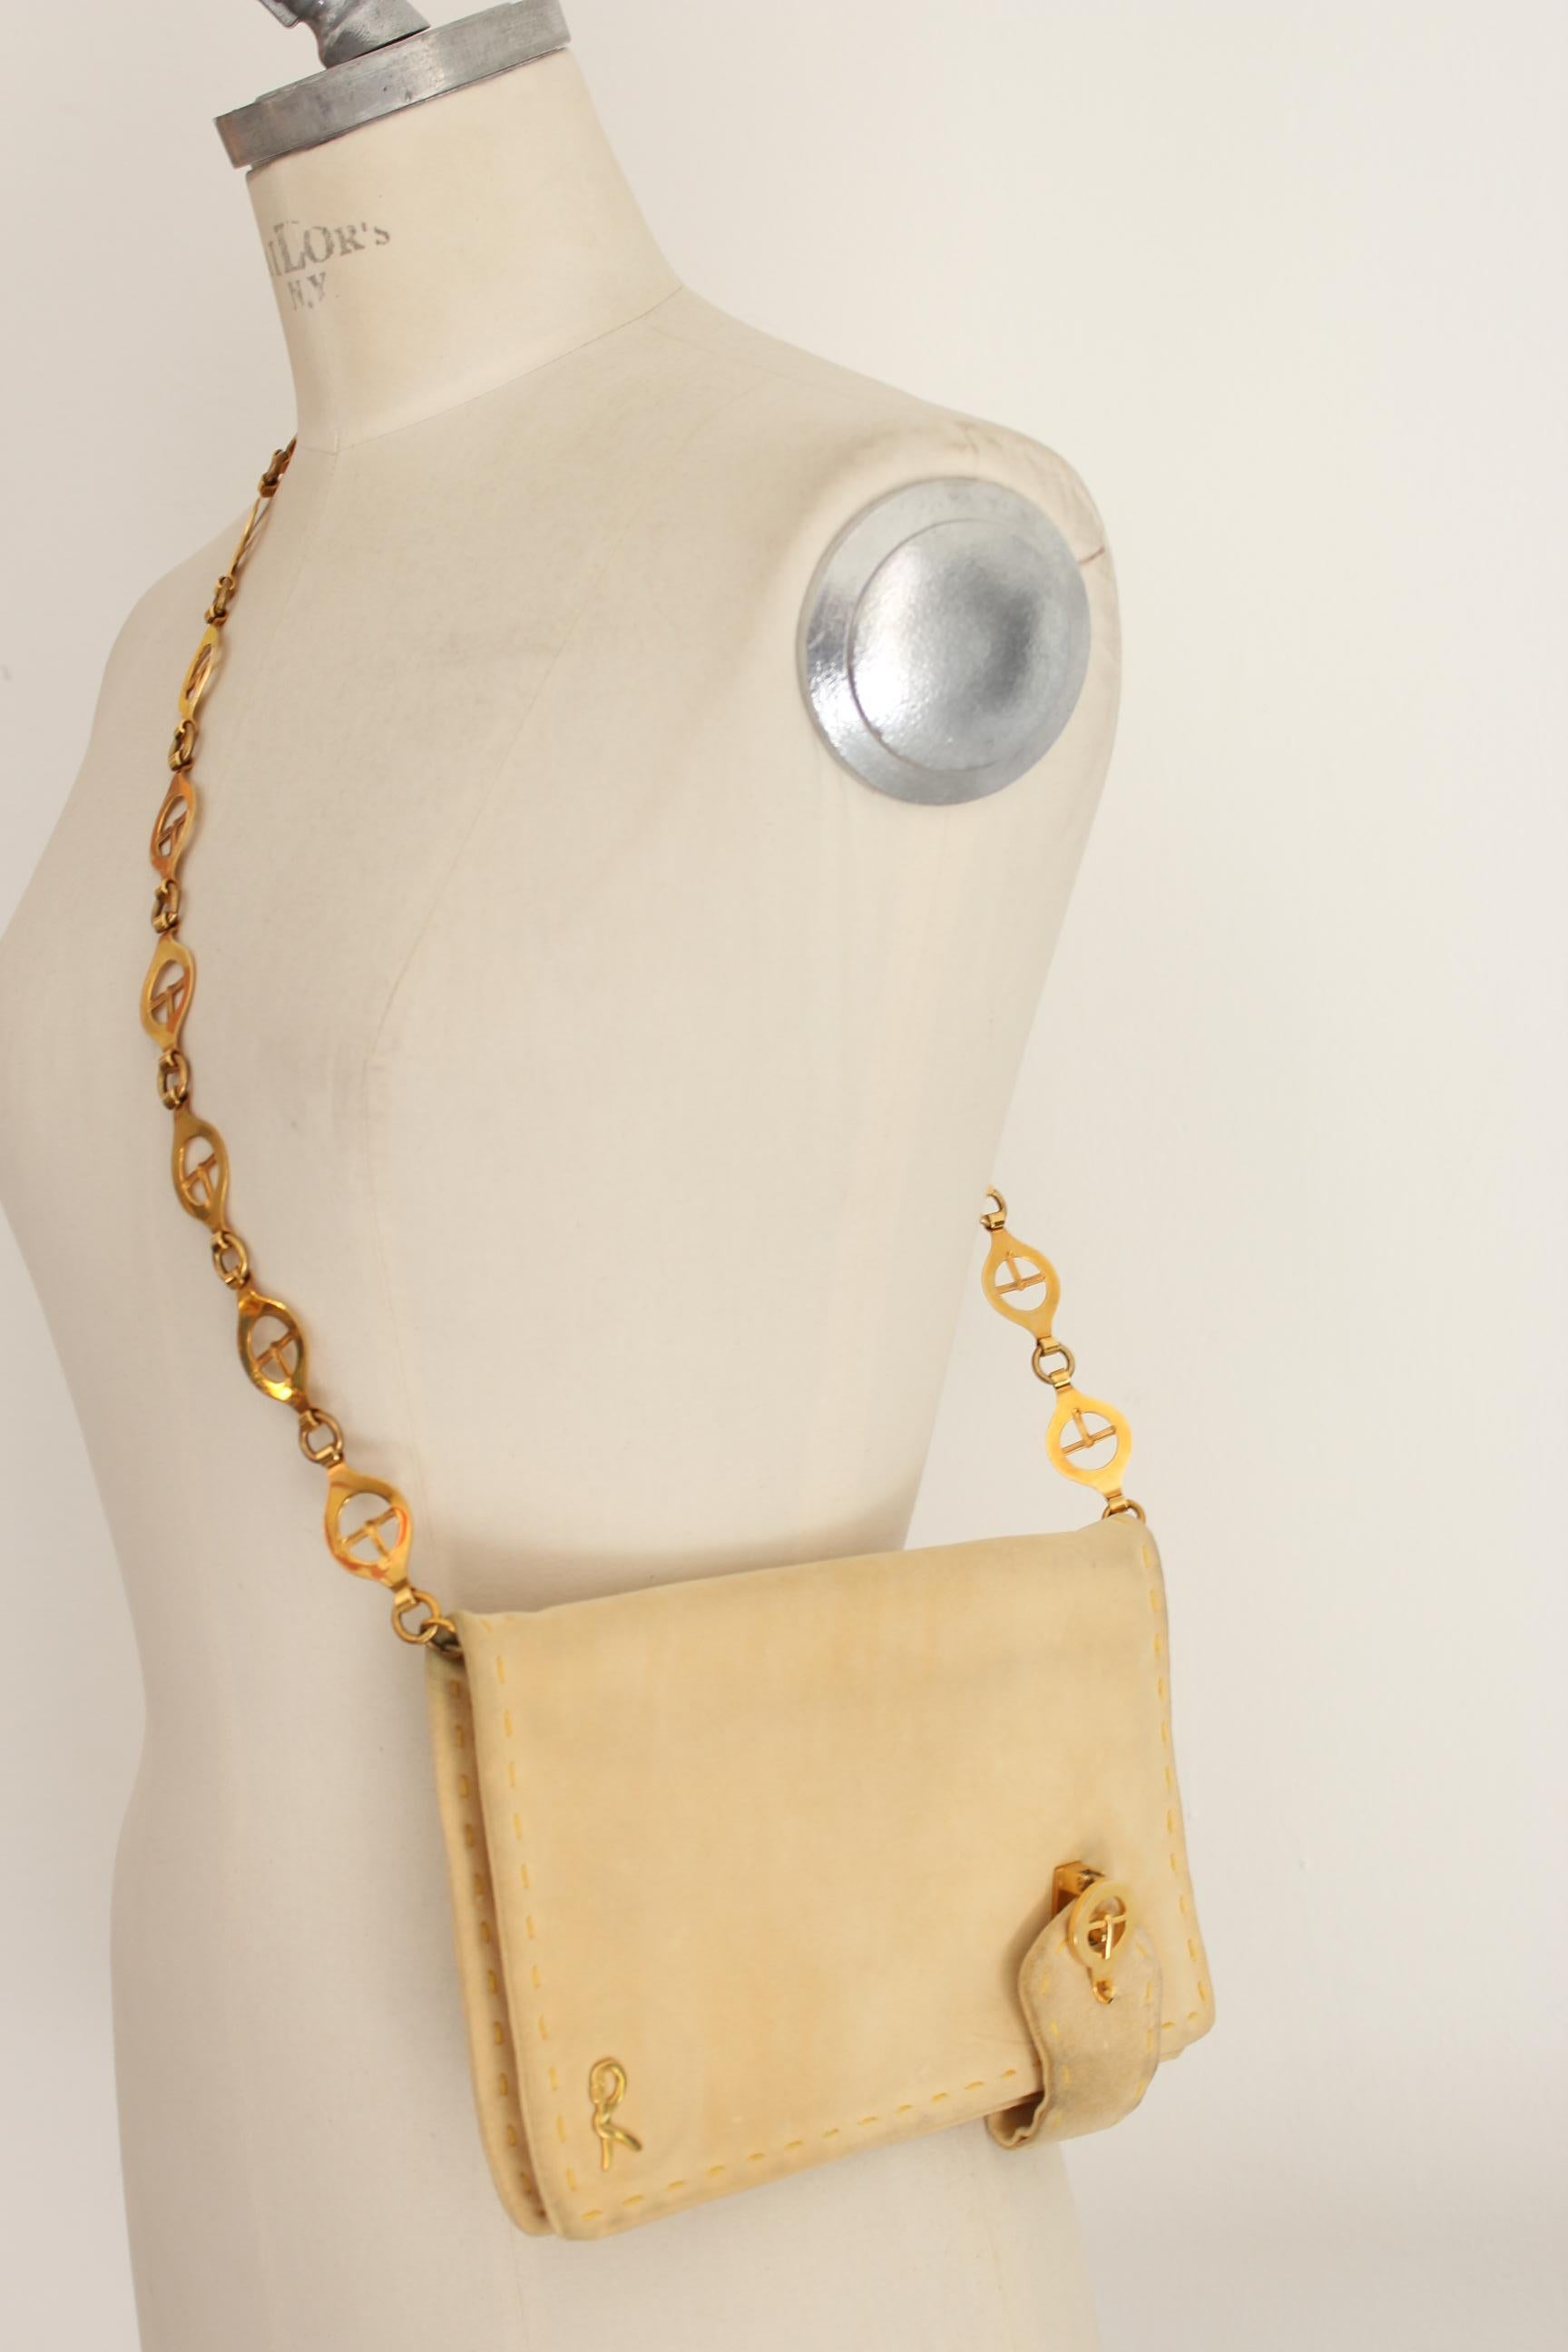 Roberta di Camerino vintage 90s shoulder bag. Evening pochette, beige color in leather suede, shoulder strap in chain color gold intertwined. Double compartment with clip closure. Stitching along the edges. Made in Italy. Good vintage condition,